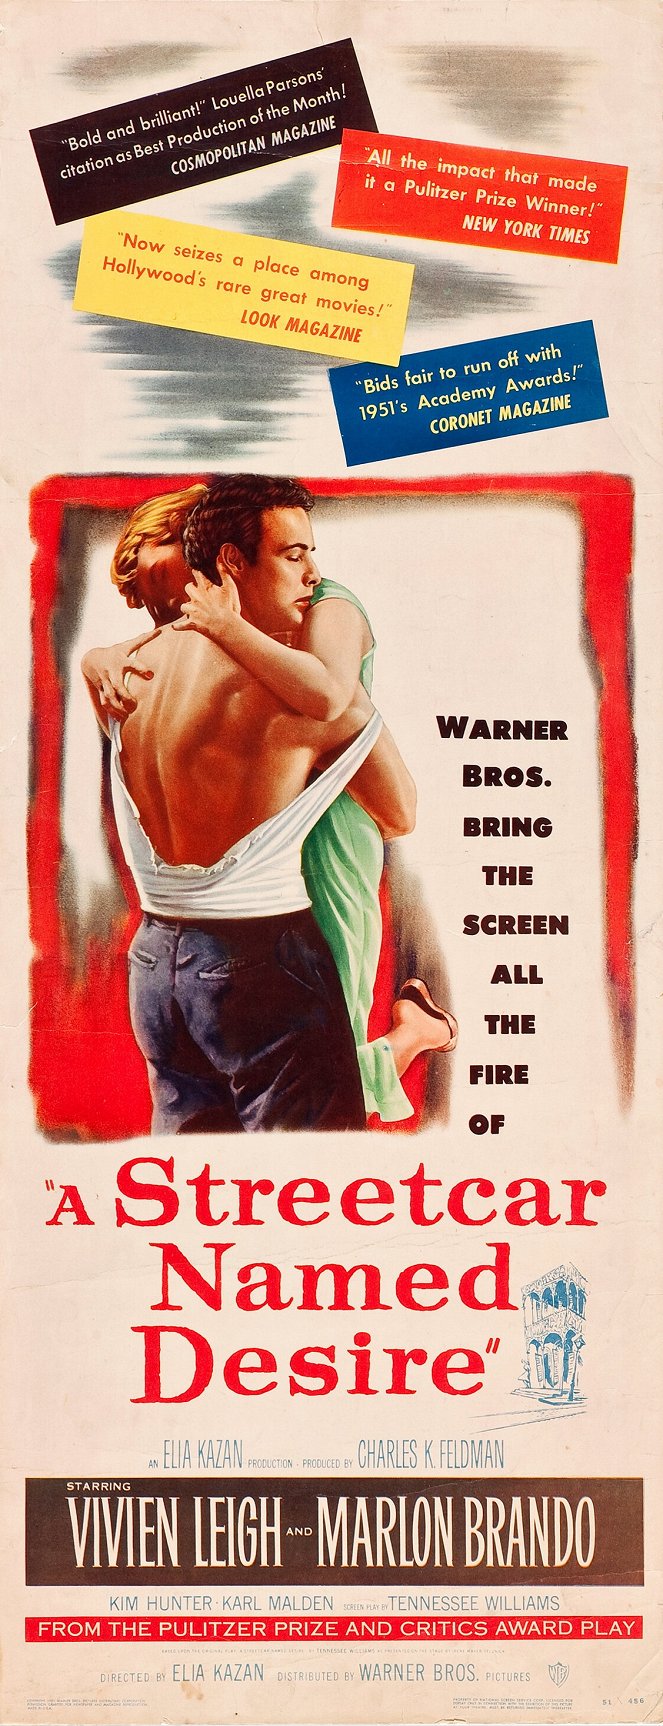 A Streetcar Named Desire - Posters